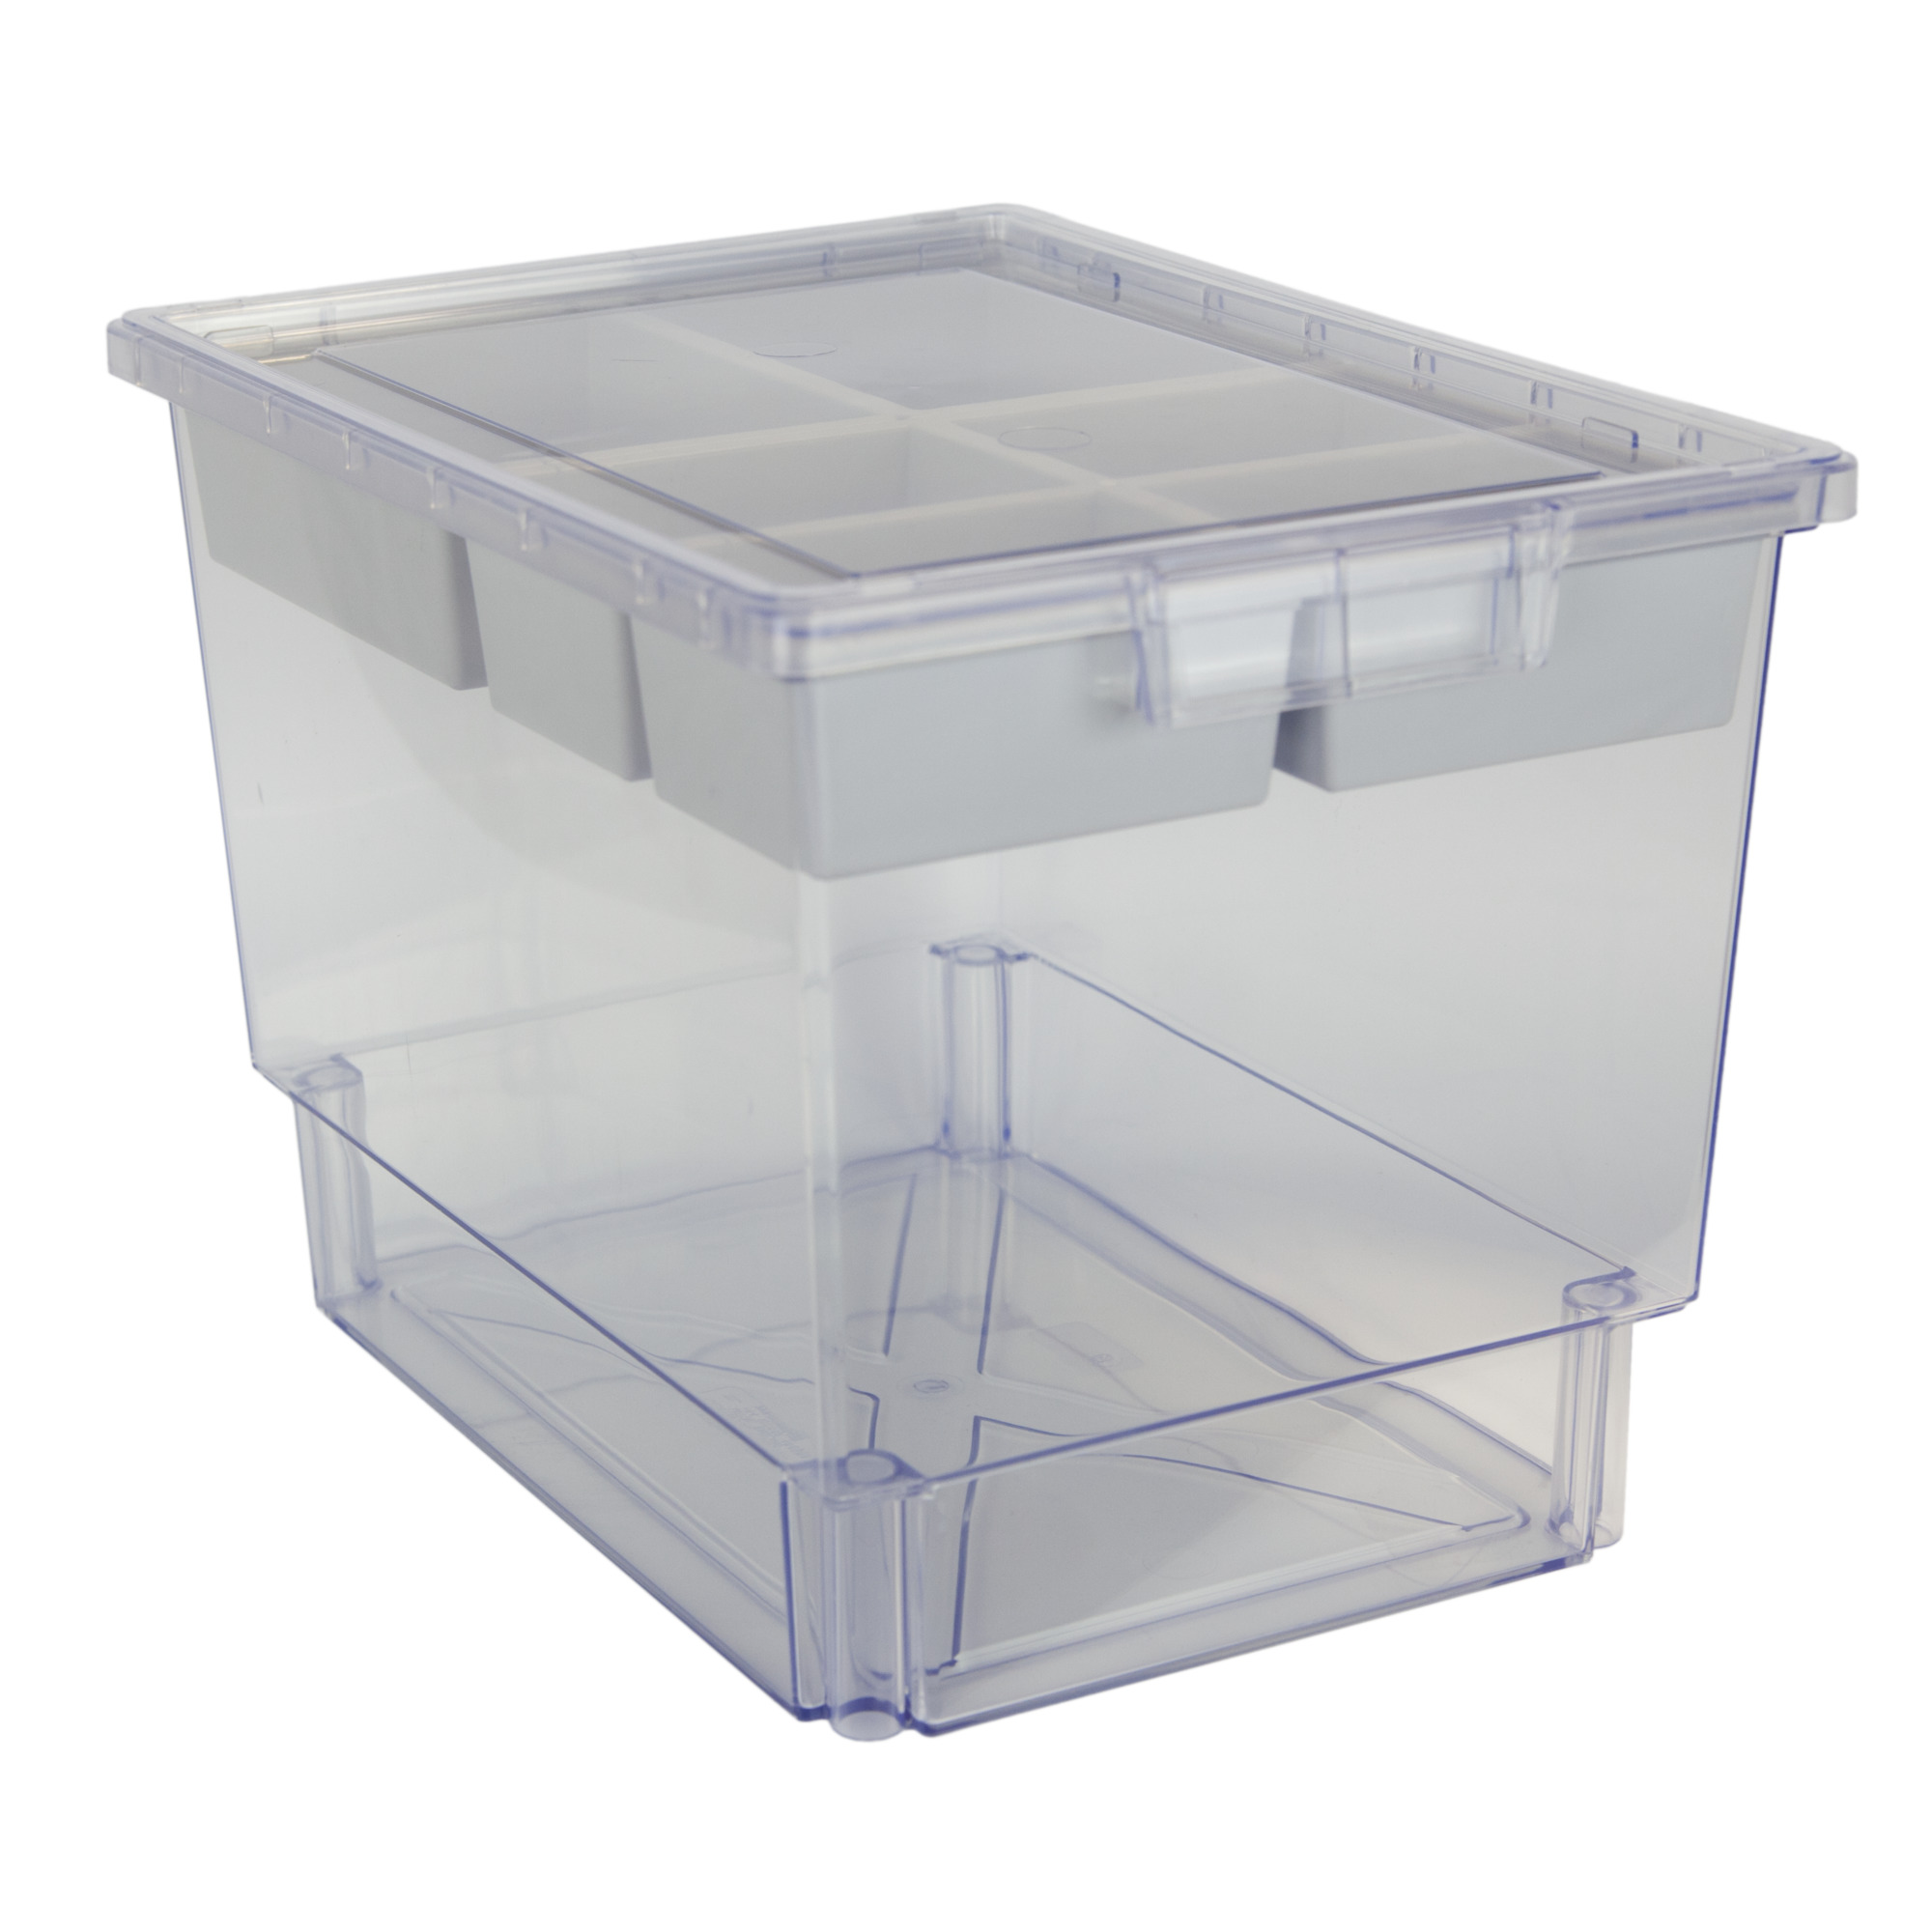 Certwood StorWerks, Slim Line 12Inch Tray Kit (6 x Divisions) Clear-3PK, Included (qty.) 3, Material Plastic, Height 9 in, Model CE1954CL-NK0300-3